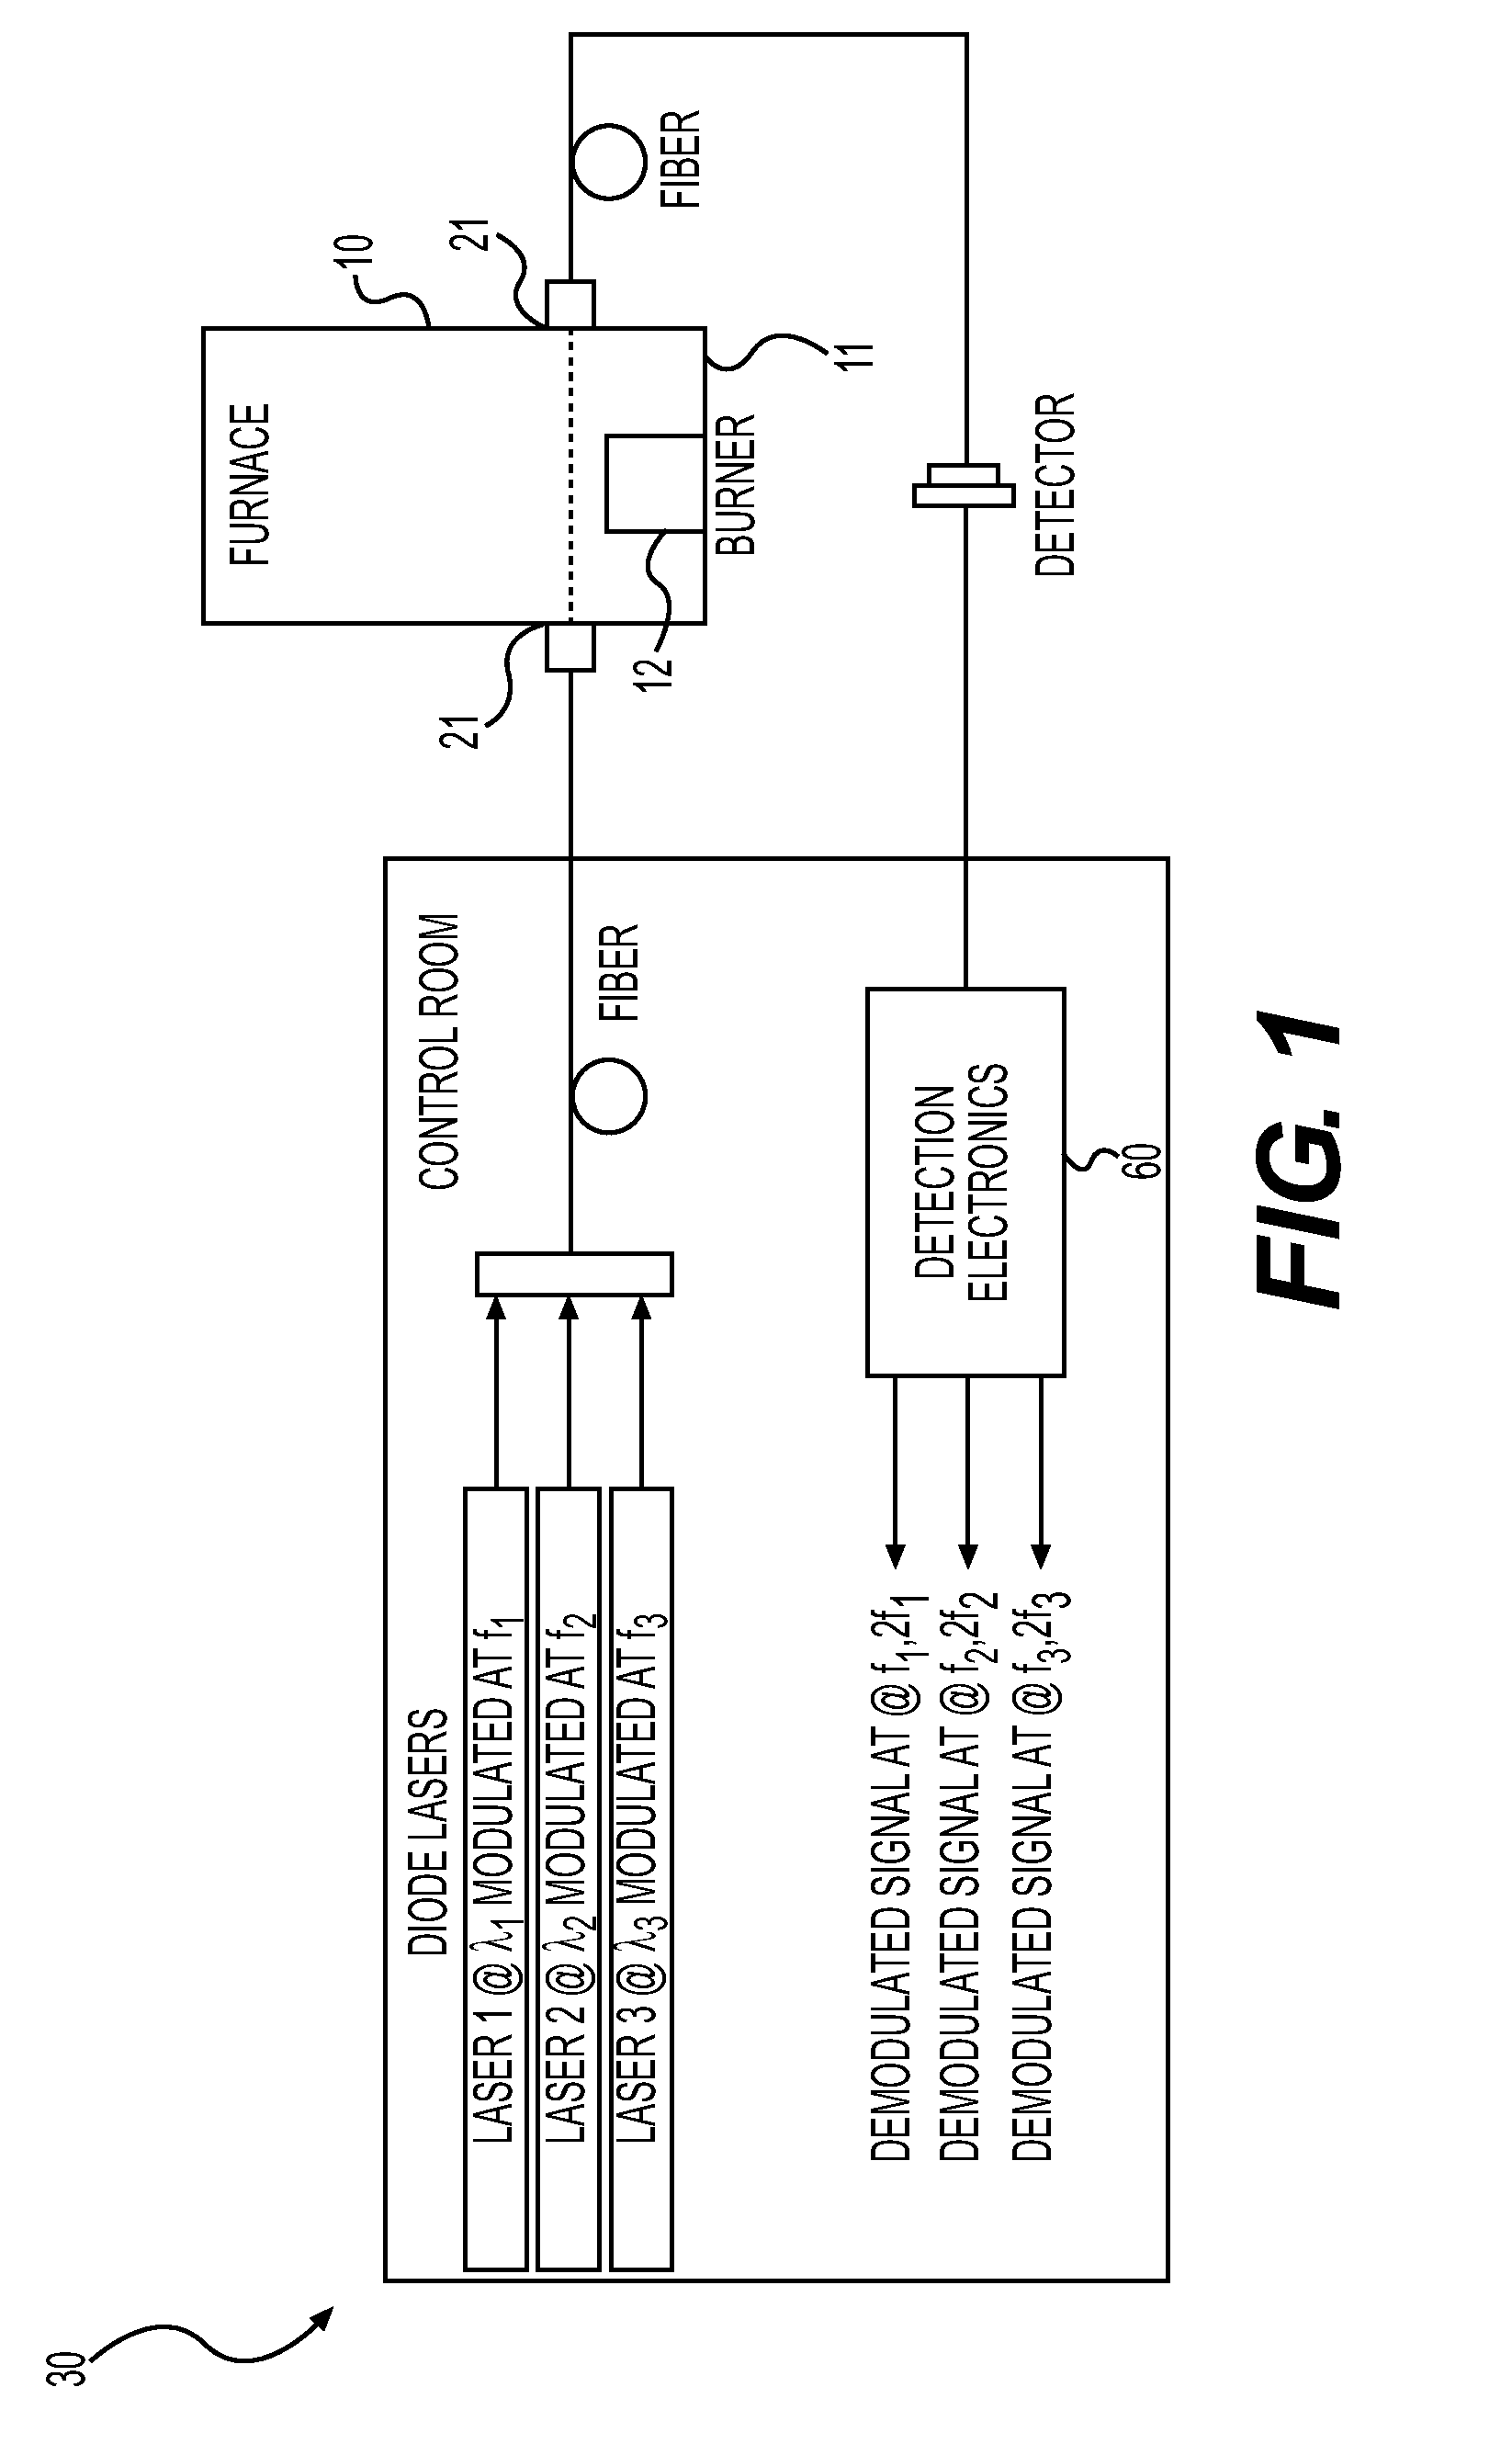 System and method for controlling fired heater operations